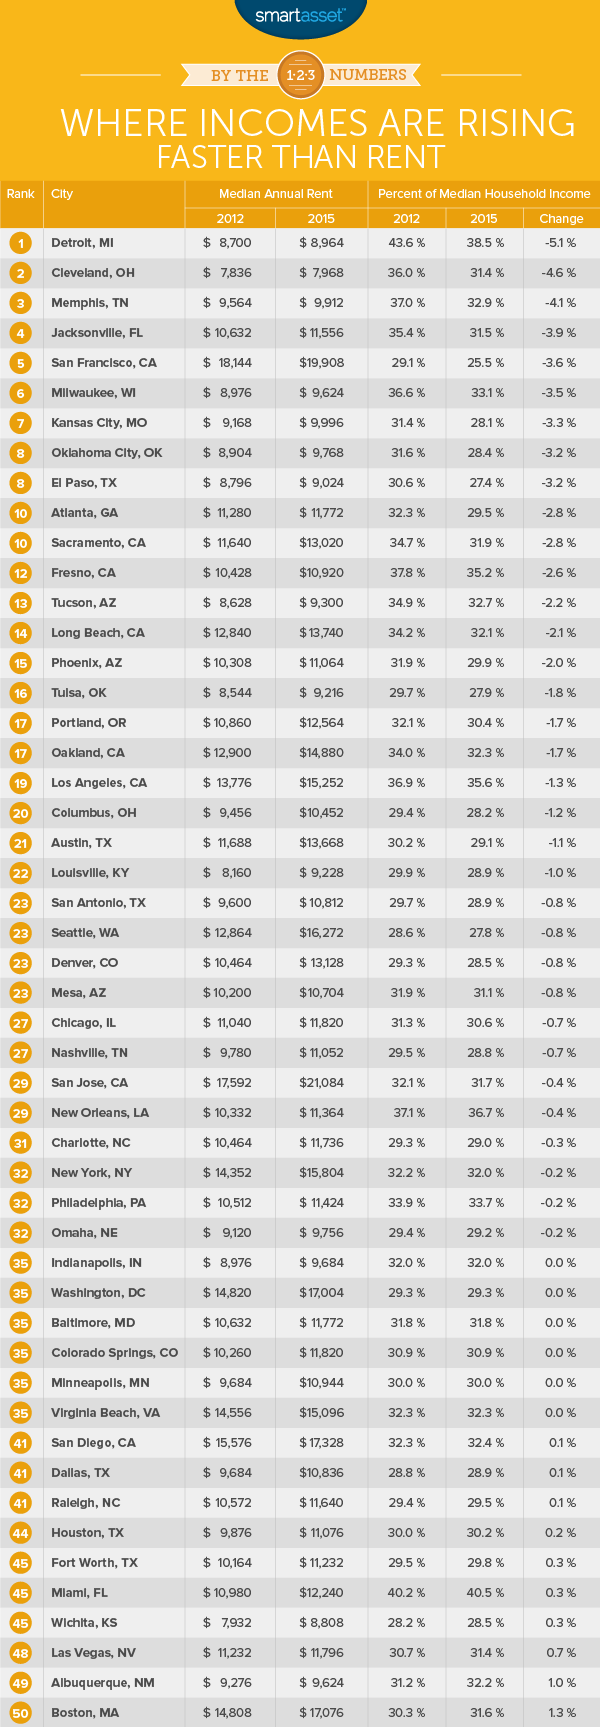 Top 10 Cities Where Incomes Are Rising Faster Than Rent Increases